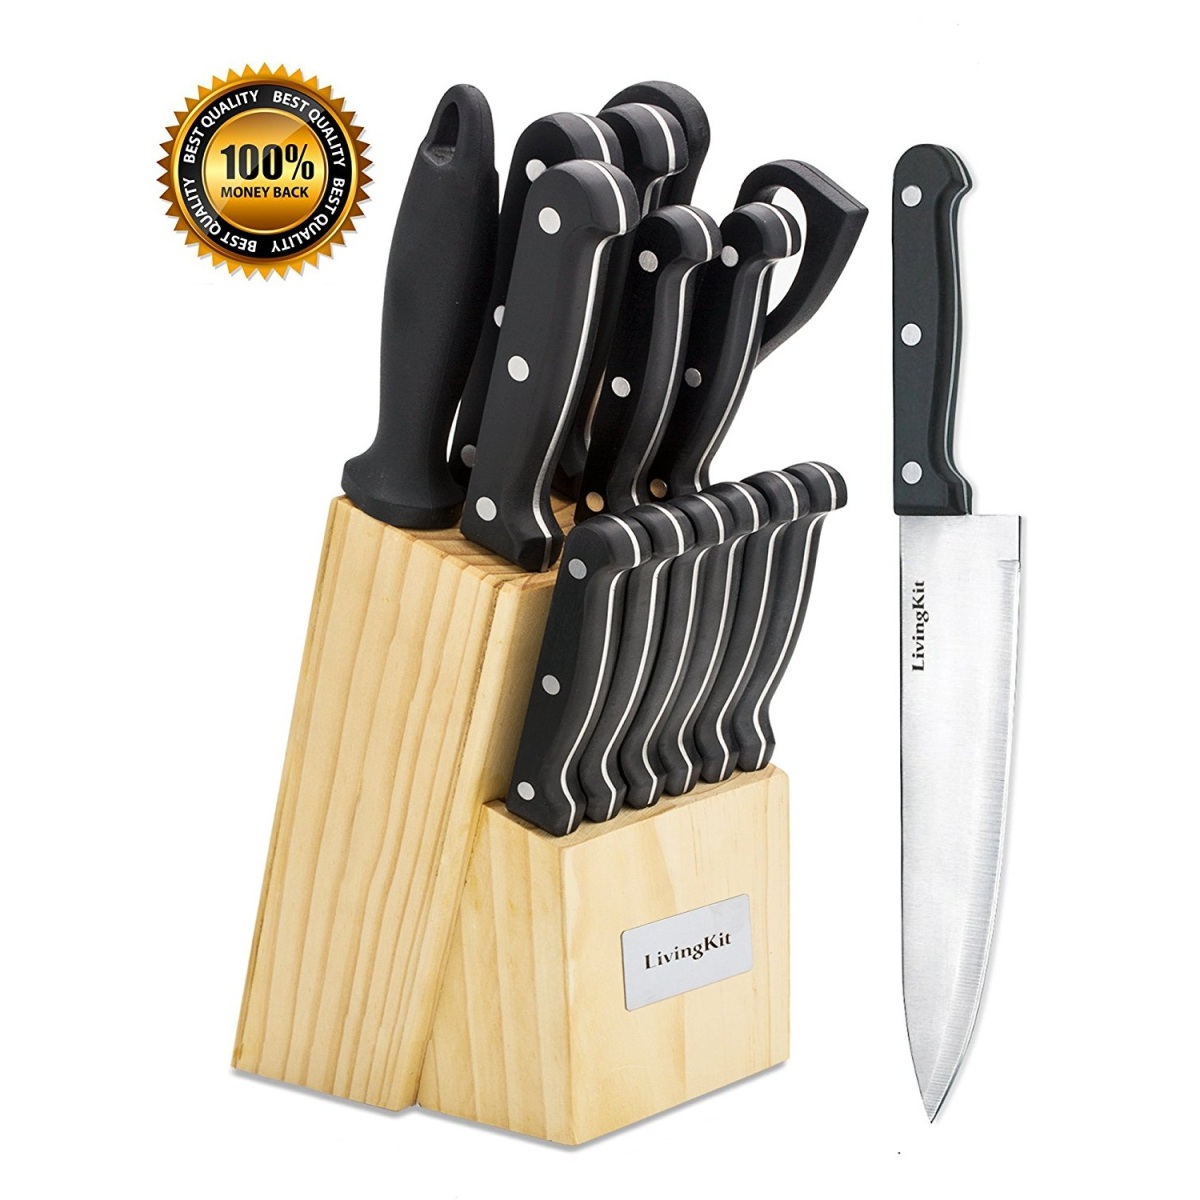 LivingKit Stainless Steel Kitchen Knife Block Set Block 14 Piece For Home Cooking Culinary School Commercial Kitchen